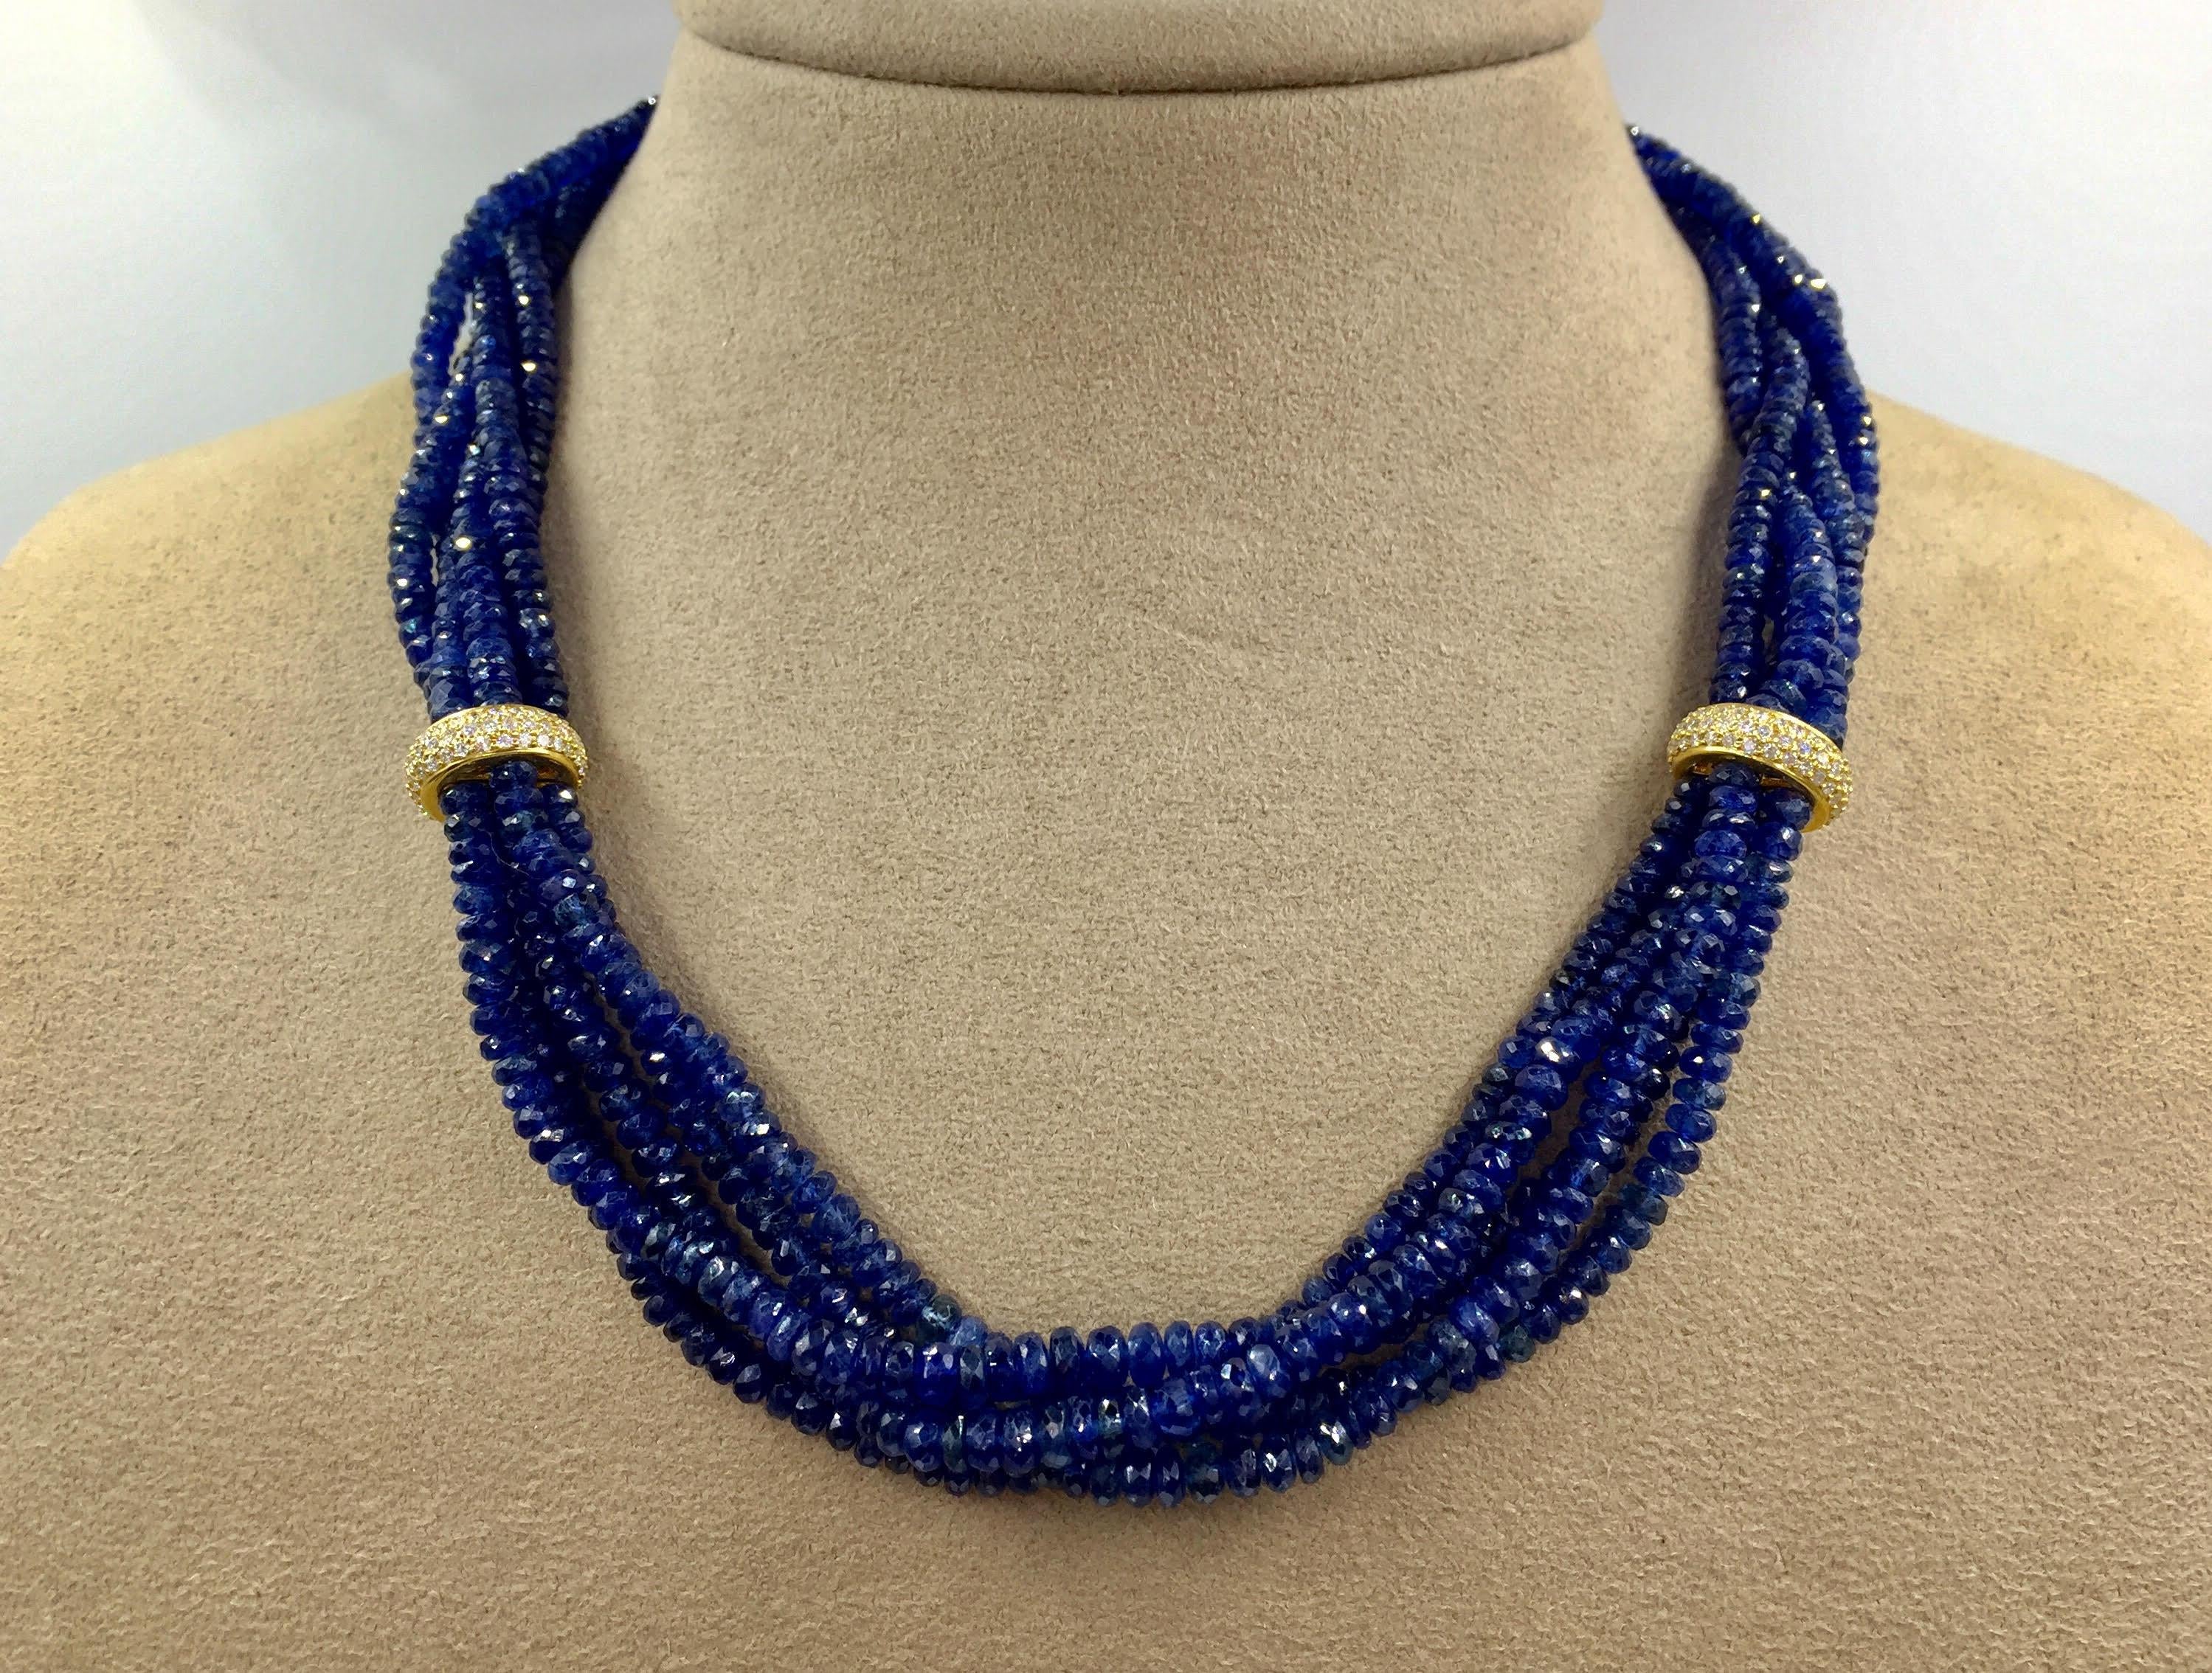 394.16 carats of sparkling genuine blue sapphire beads are expertly strung on this unique five strand necklace. Two stationary separators and the clasp are pavé set with a total of 3.16 carats of high quality diamonds (approximately G color, VS